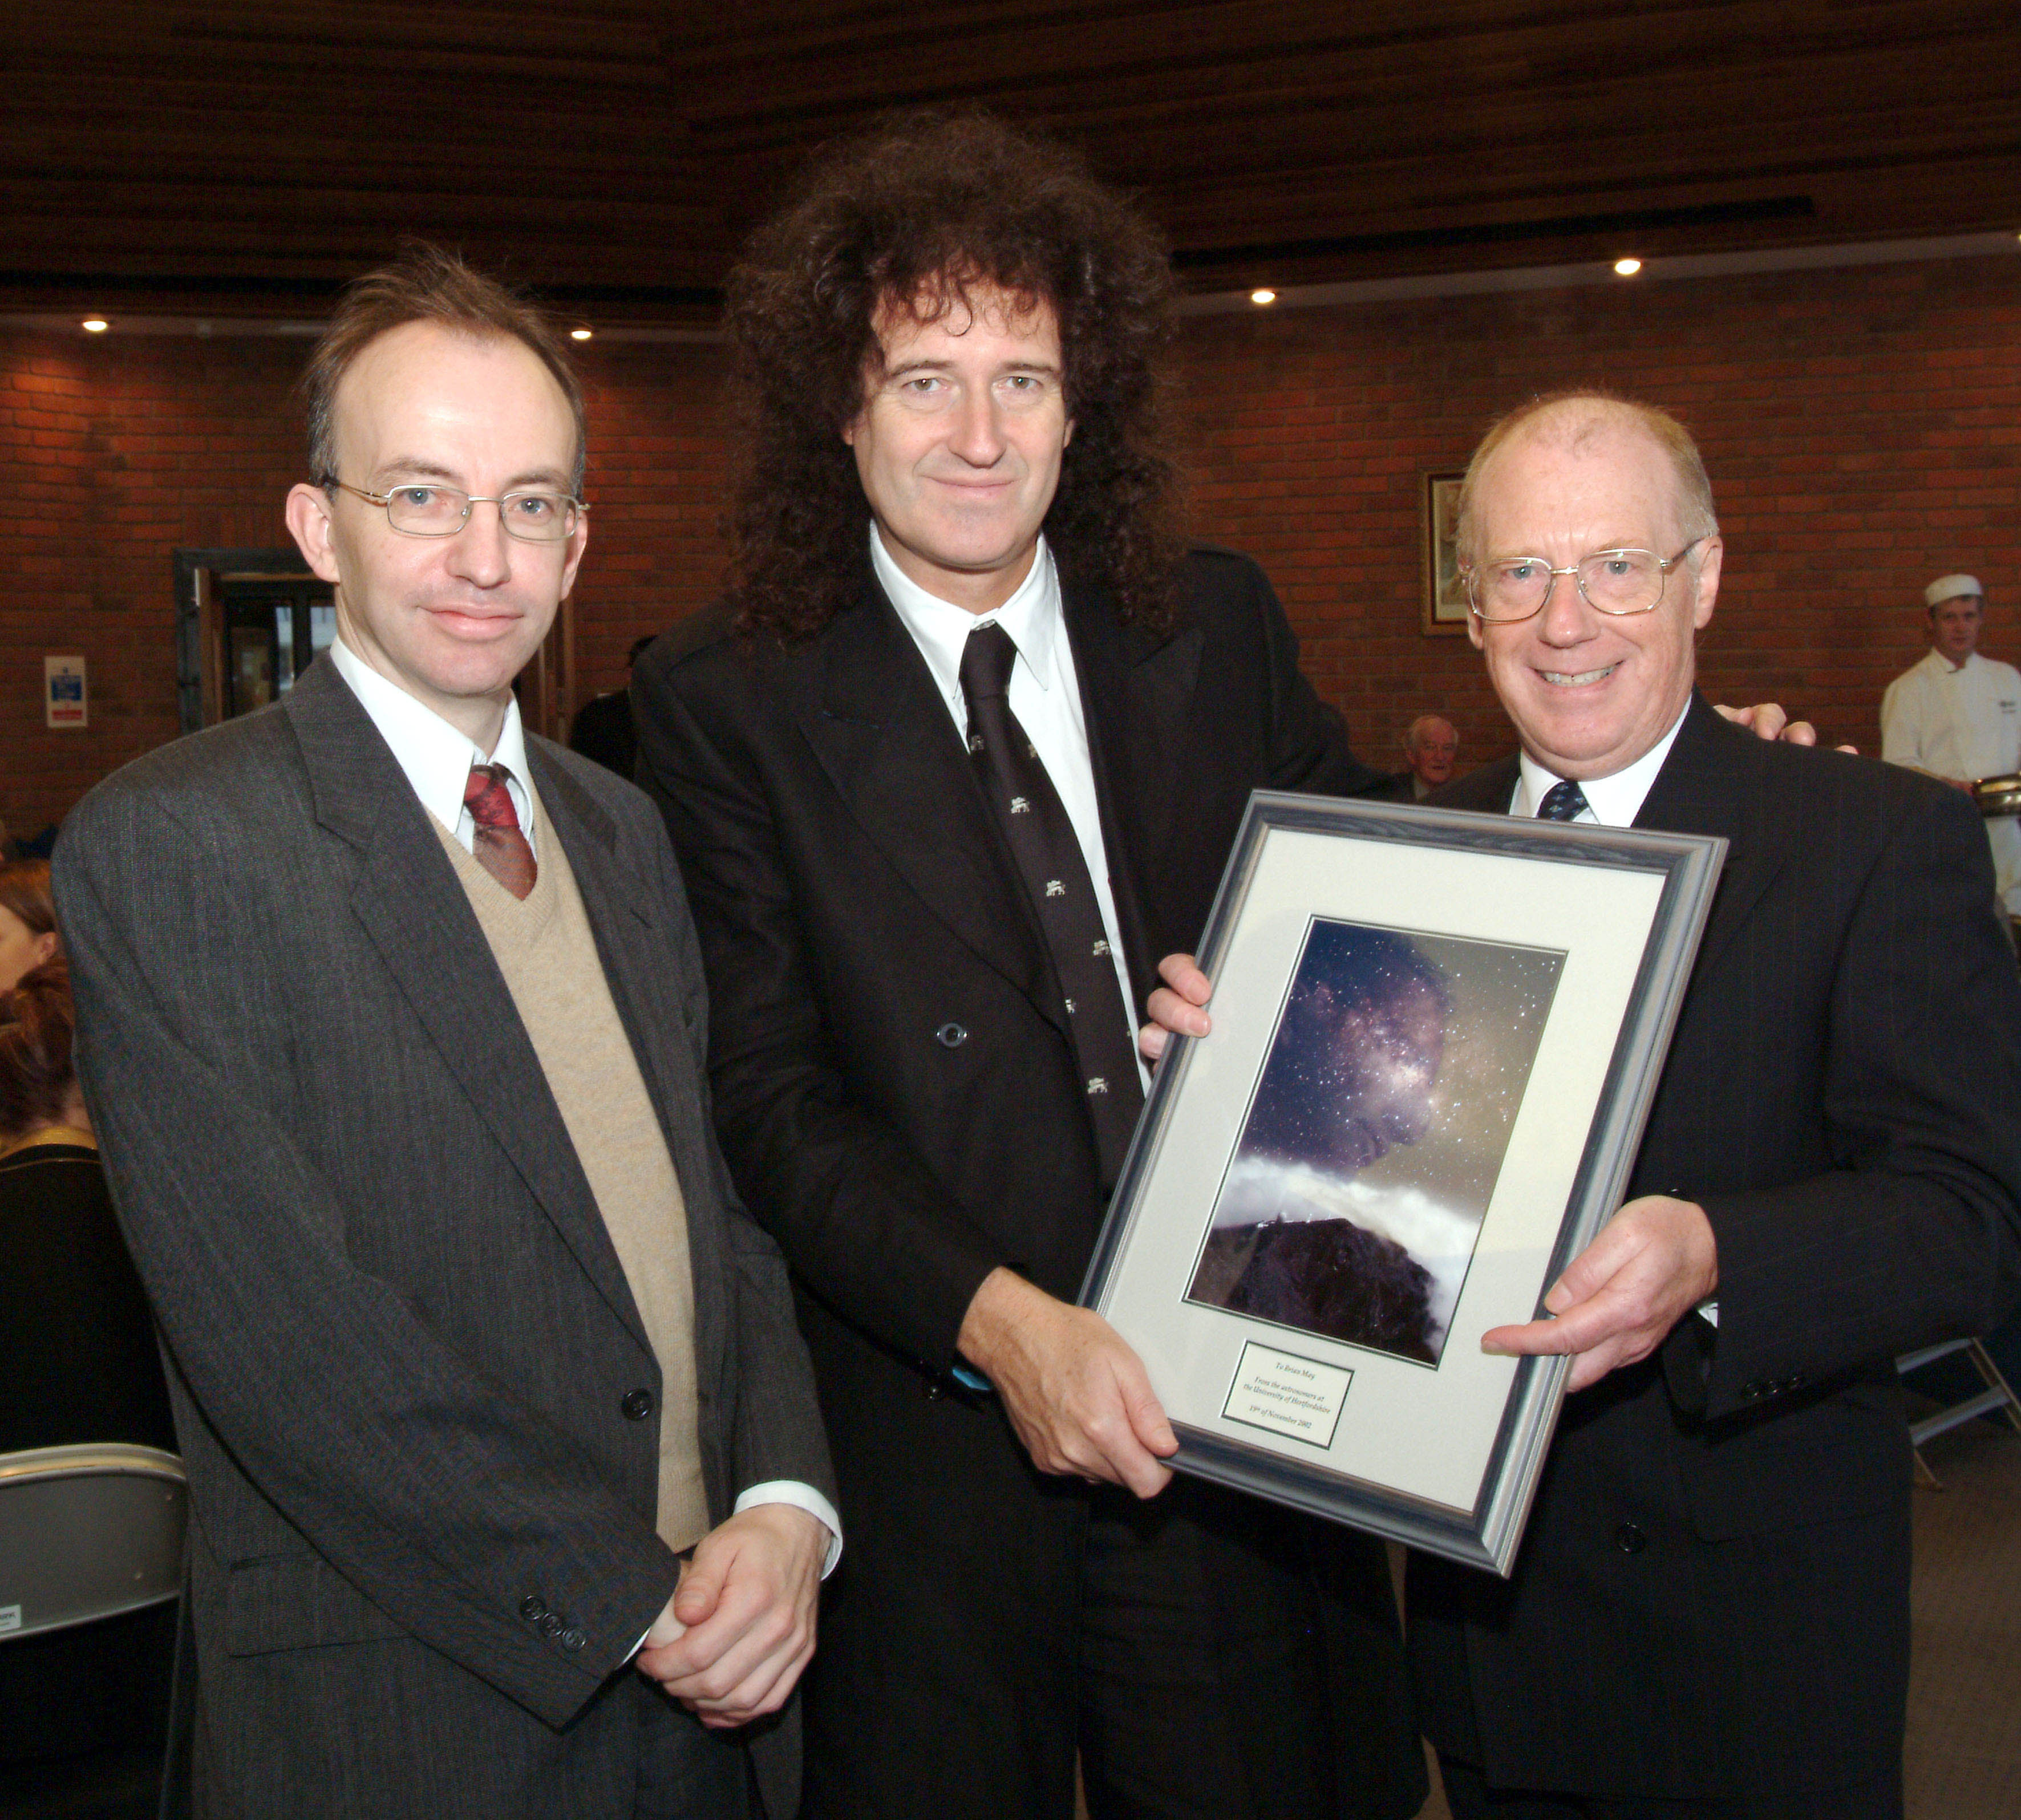 The photo shows Brian May being presented with an astronomical photograph by James Hough and colleague James Collett after the honorary degree ceremony.